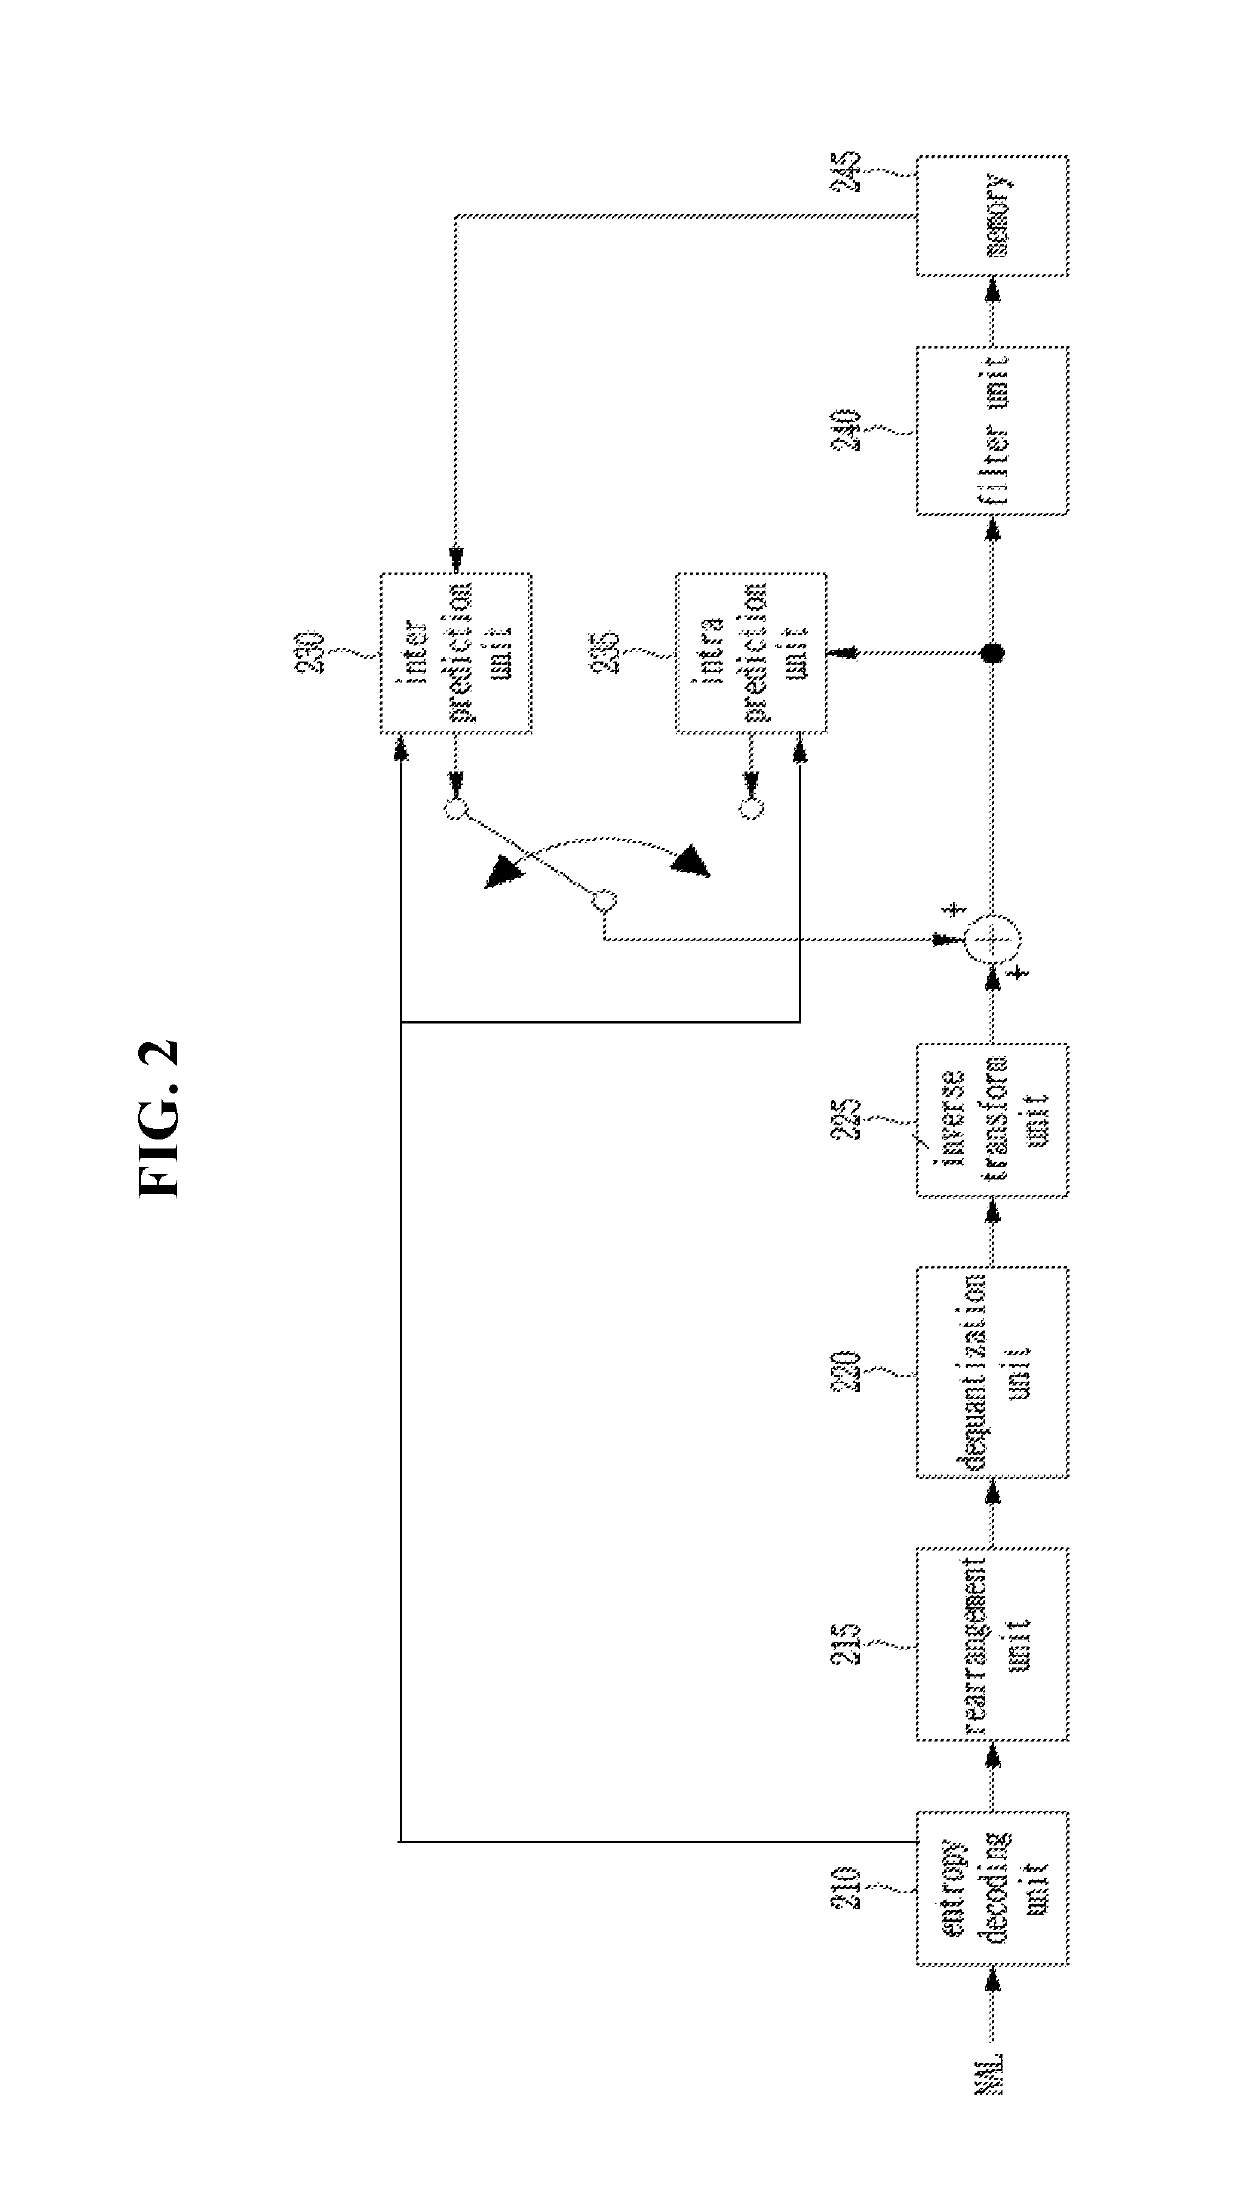 Method and apparatus for predicting and restoring a video signal using palette entry and palette mode